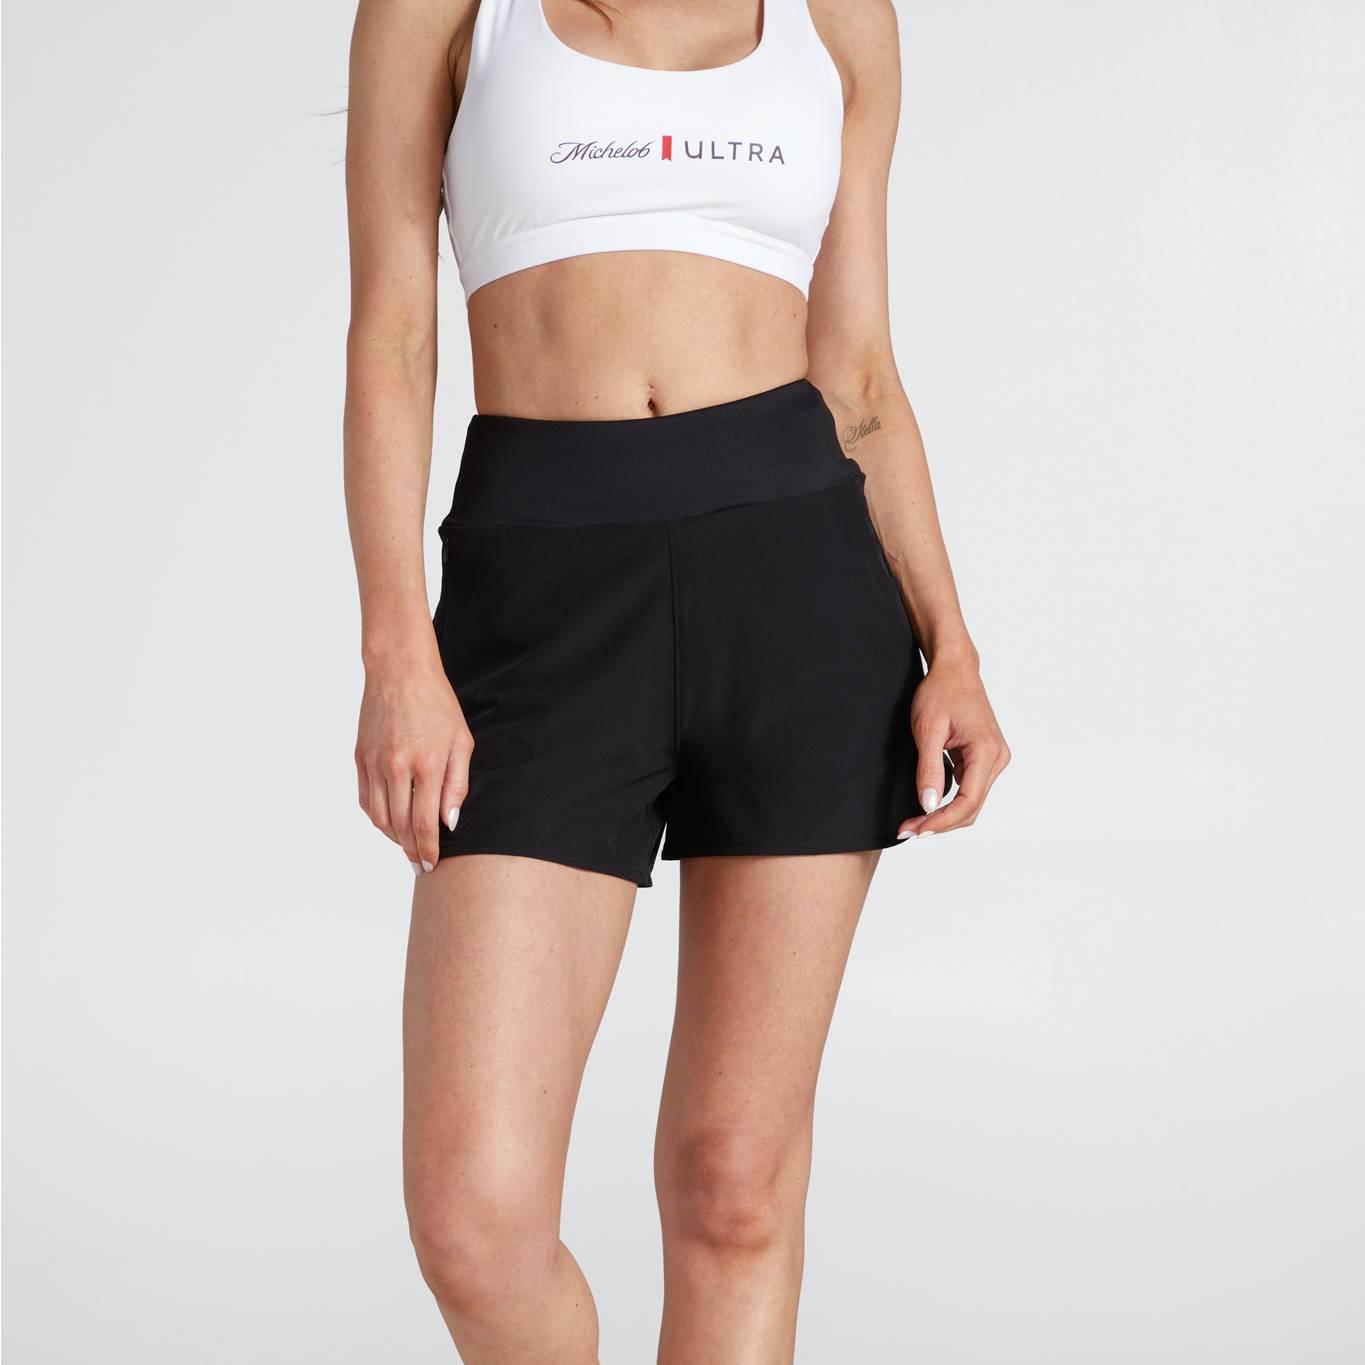 front view of model wearing shorts with no logo